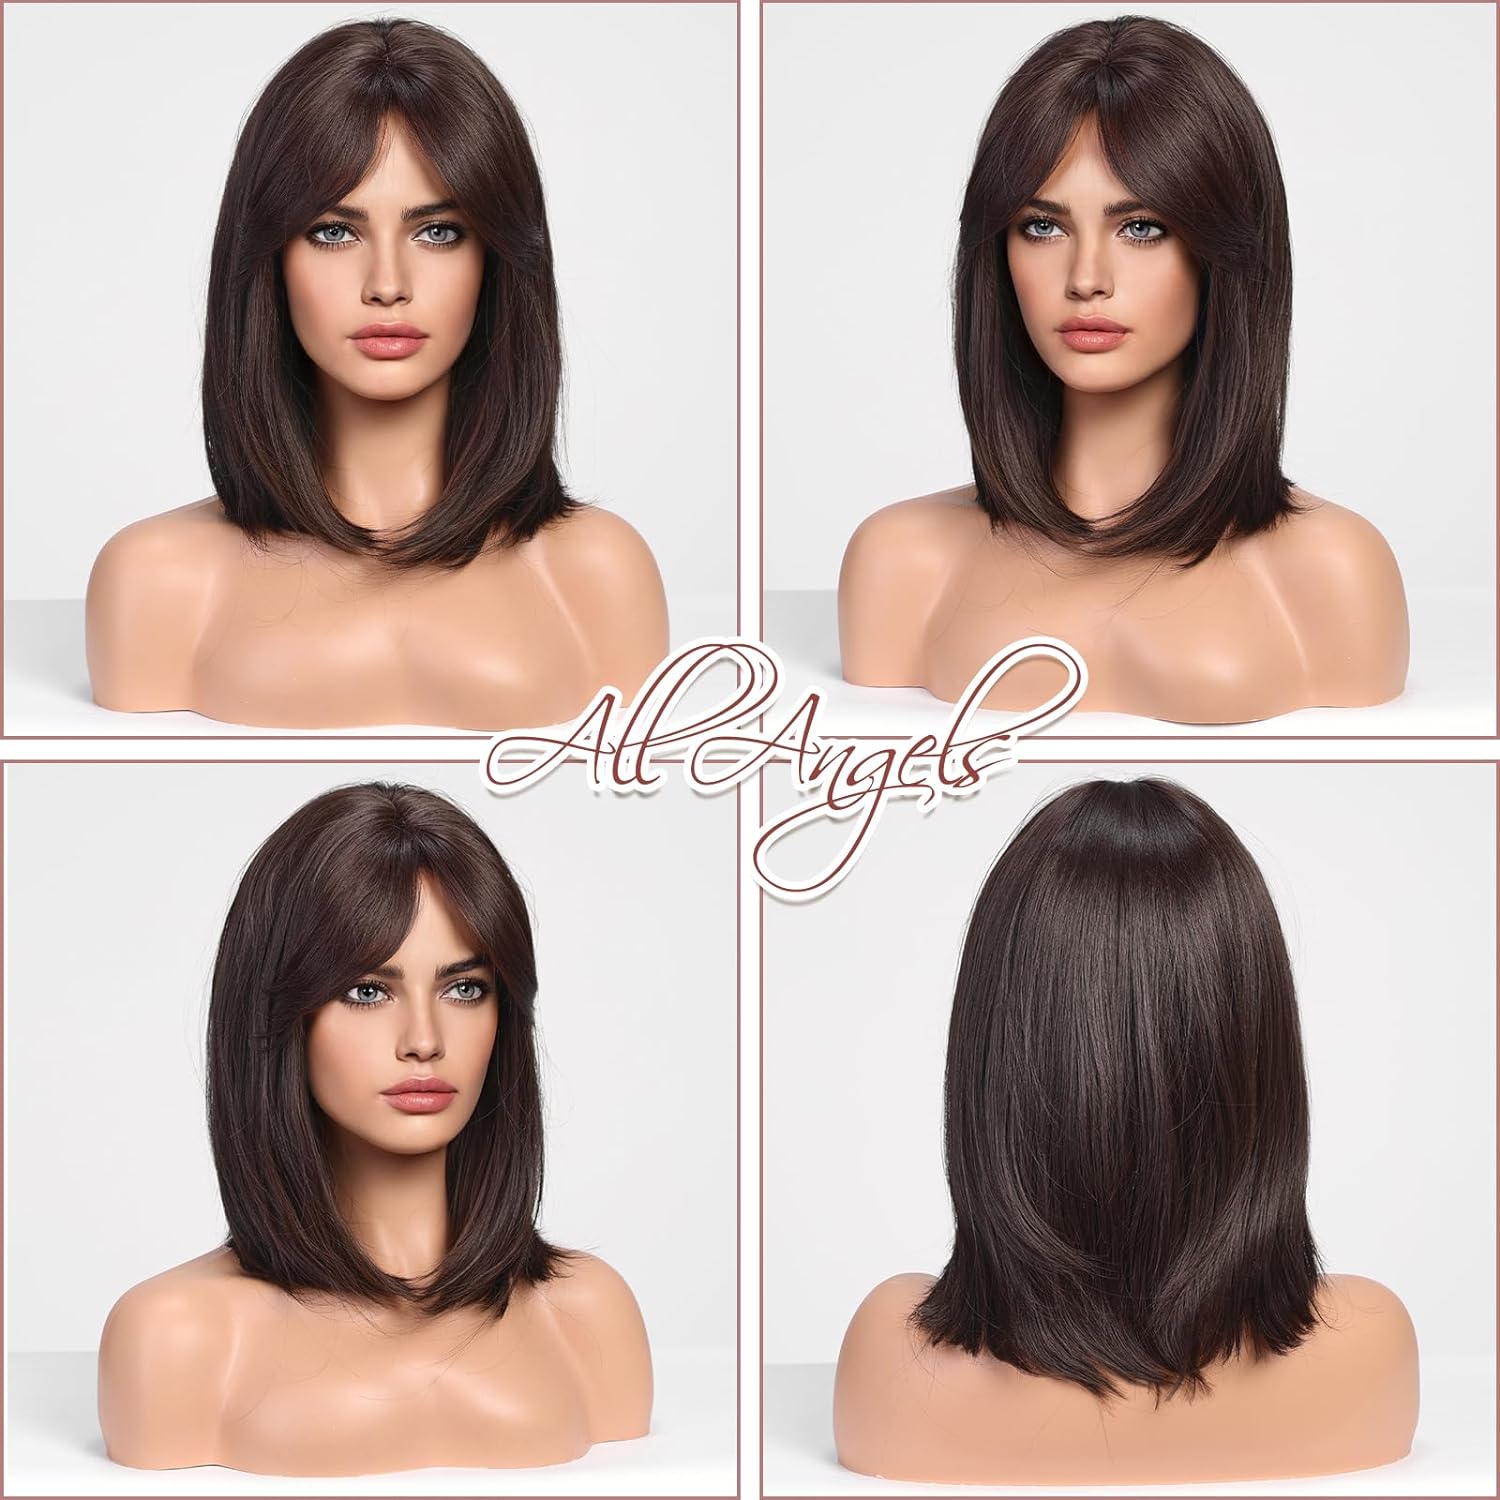 OWNCHIC Shoulder Length Straight Wig with Curtain Bangs